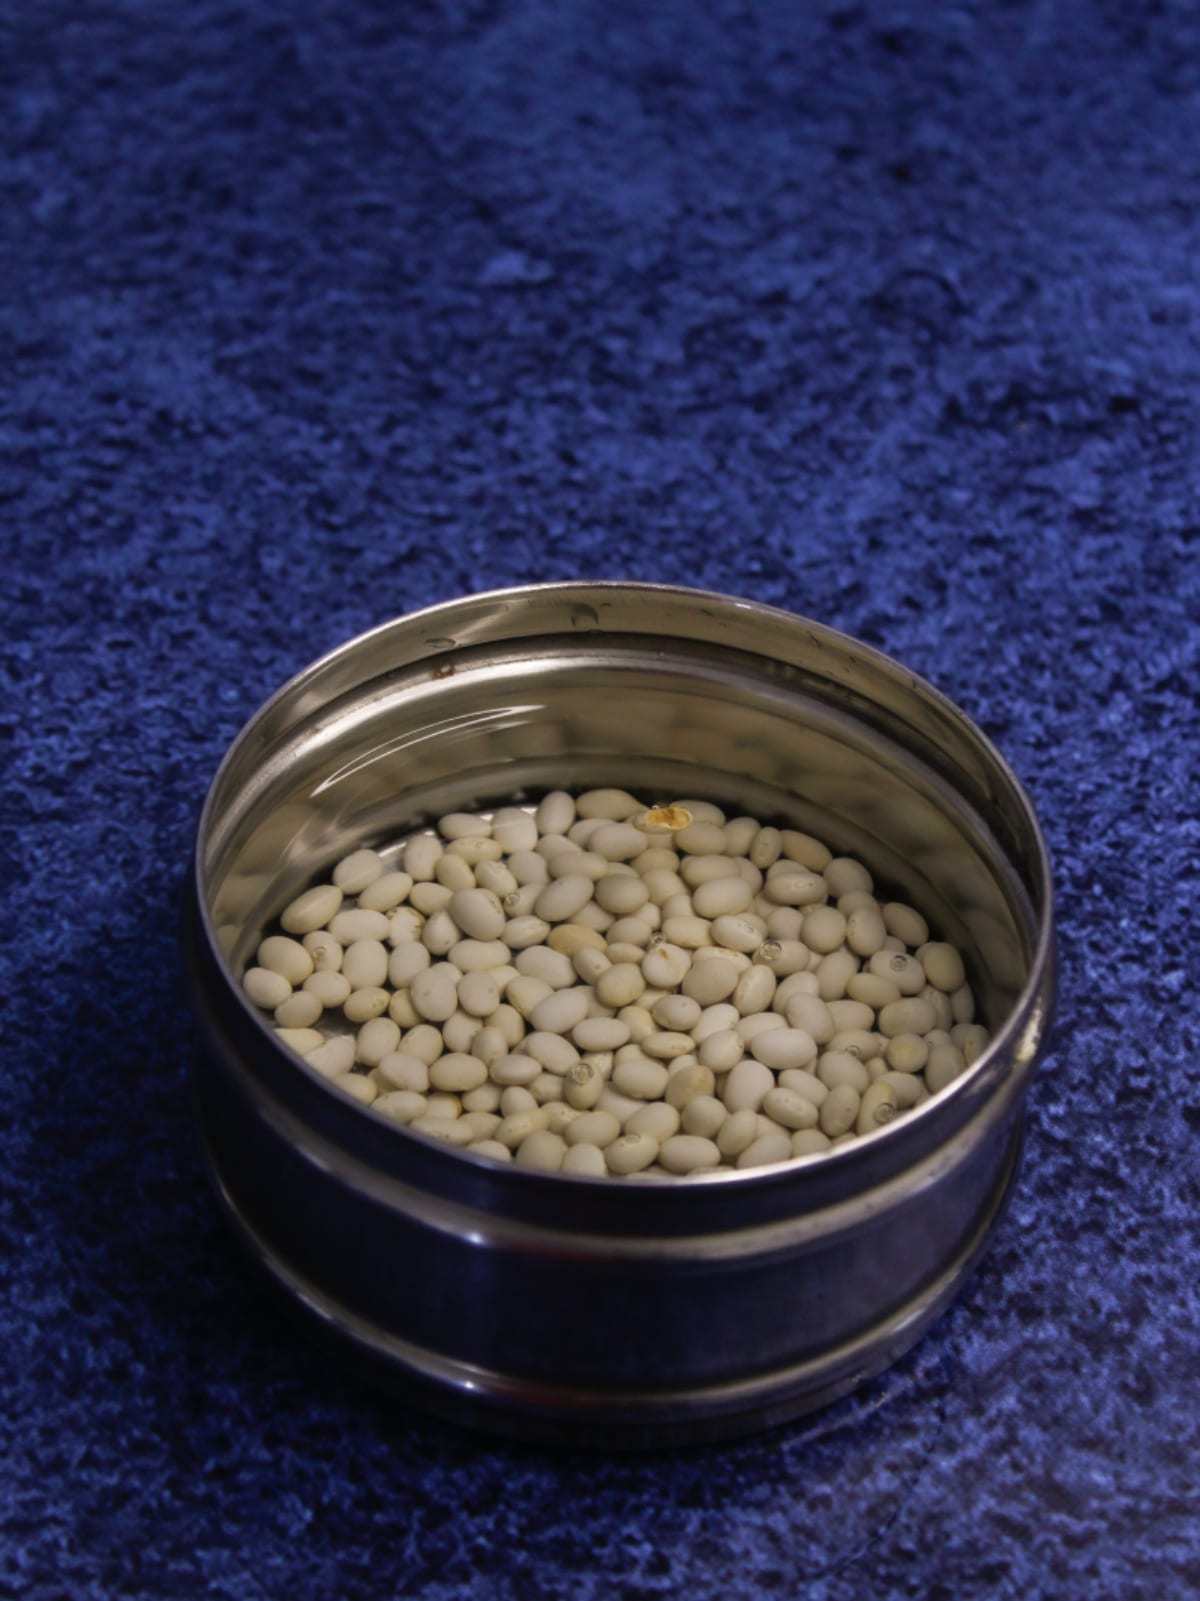 Black eyed peas in a container